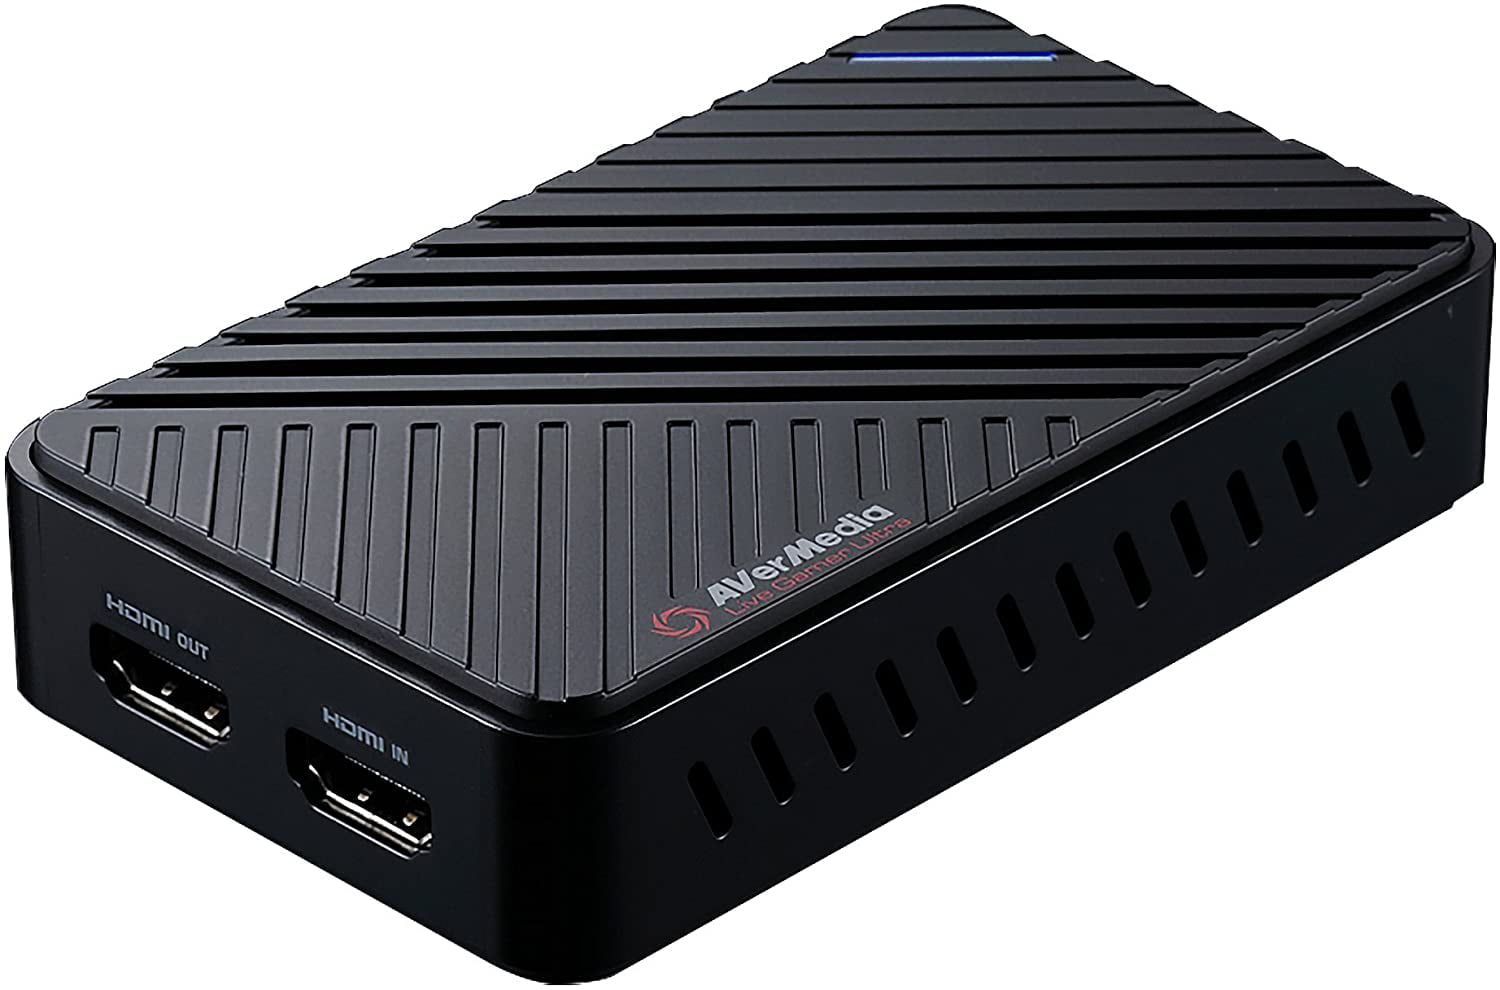 AVerMedia Live Gamer Ultra – 4Kp60 HDR Pass-Through, 4Kp30 Capture Card,  Ultra-Low Latency for Broadcasting and Recording PS4 Pro and Xbox One X,  USB